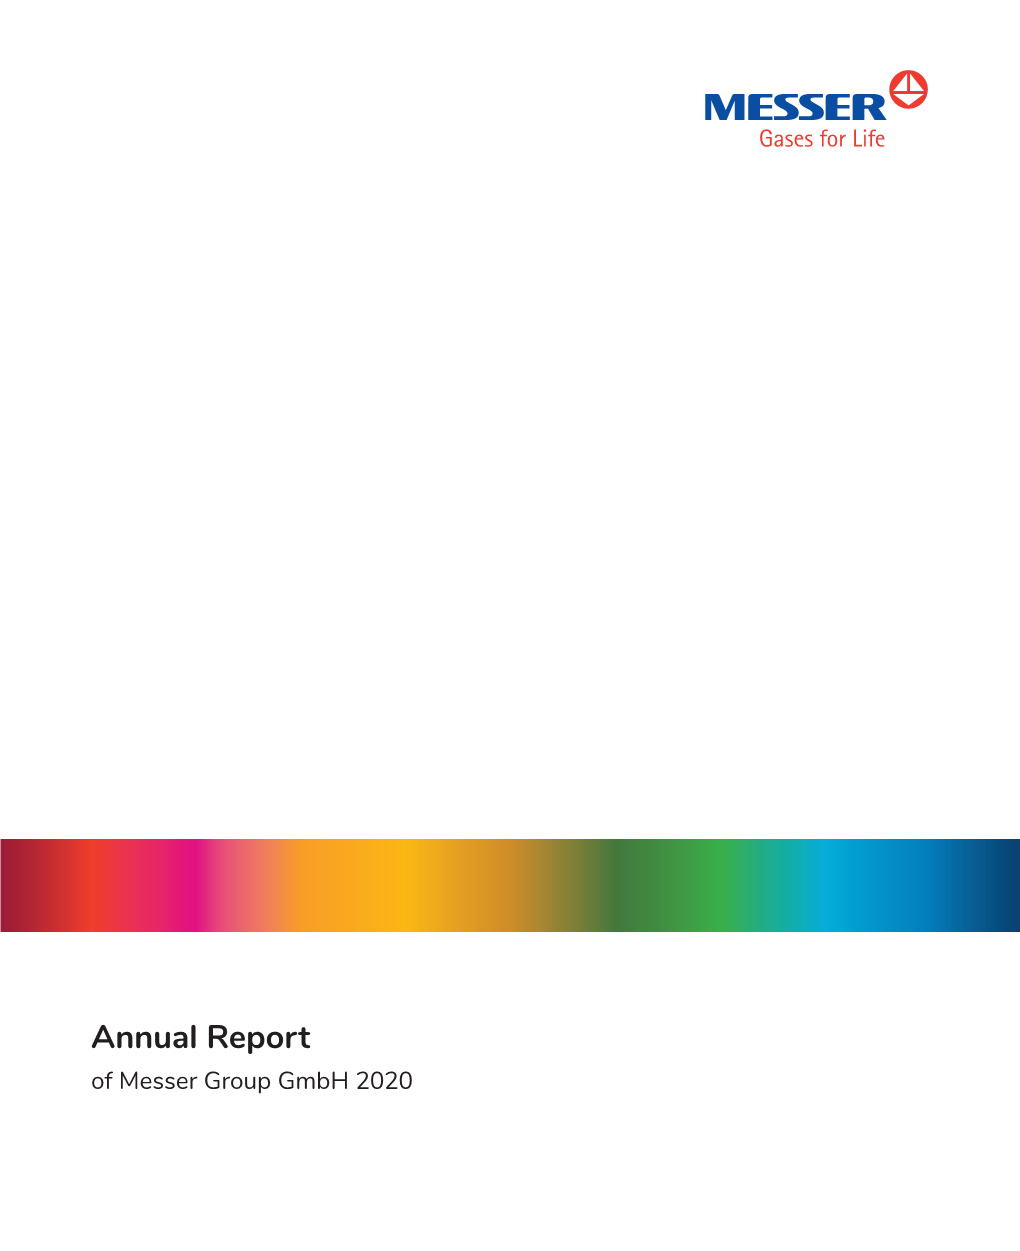 Annual Report of Messer Group Gmbh 2020 2 Annual Report of Messer Group Gmbh 2020 Annual Report of Messer Group Gmbh 2020 3